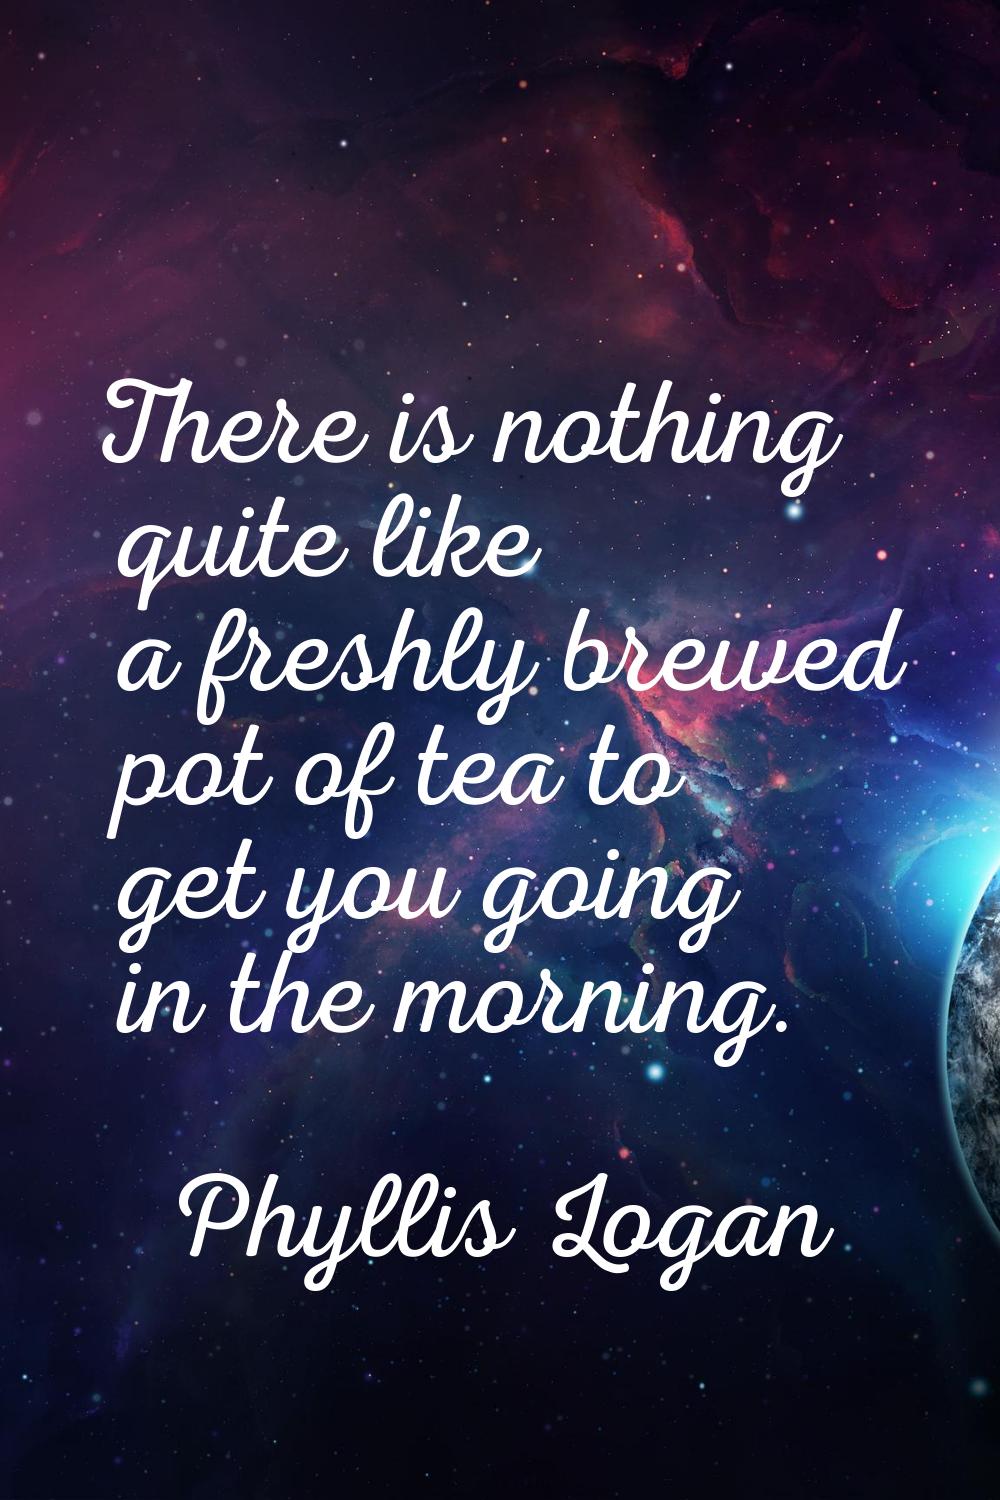 There is nothing quite like a freshly brewed pot of tea to get you going in the morning.